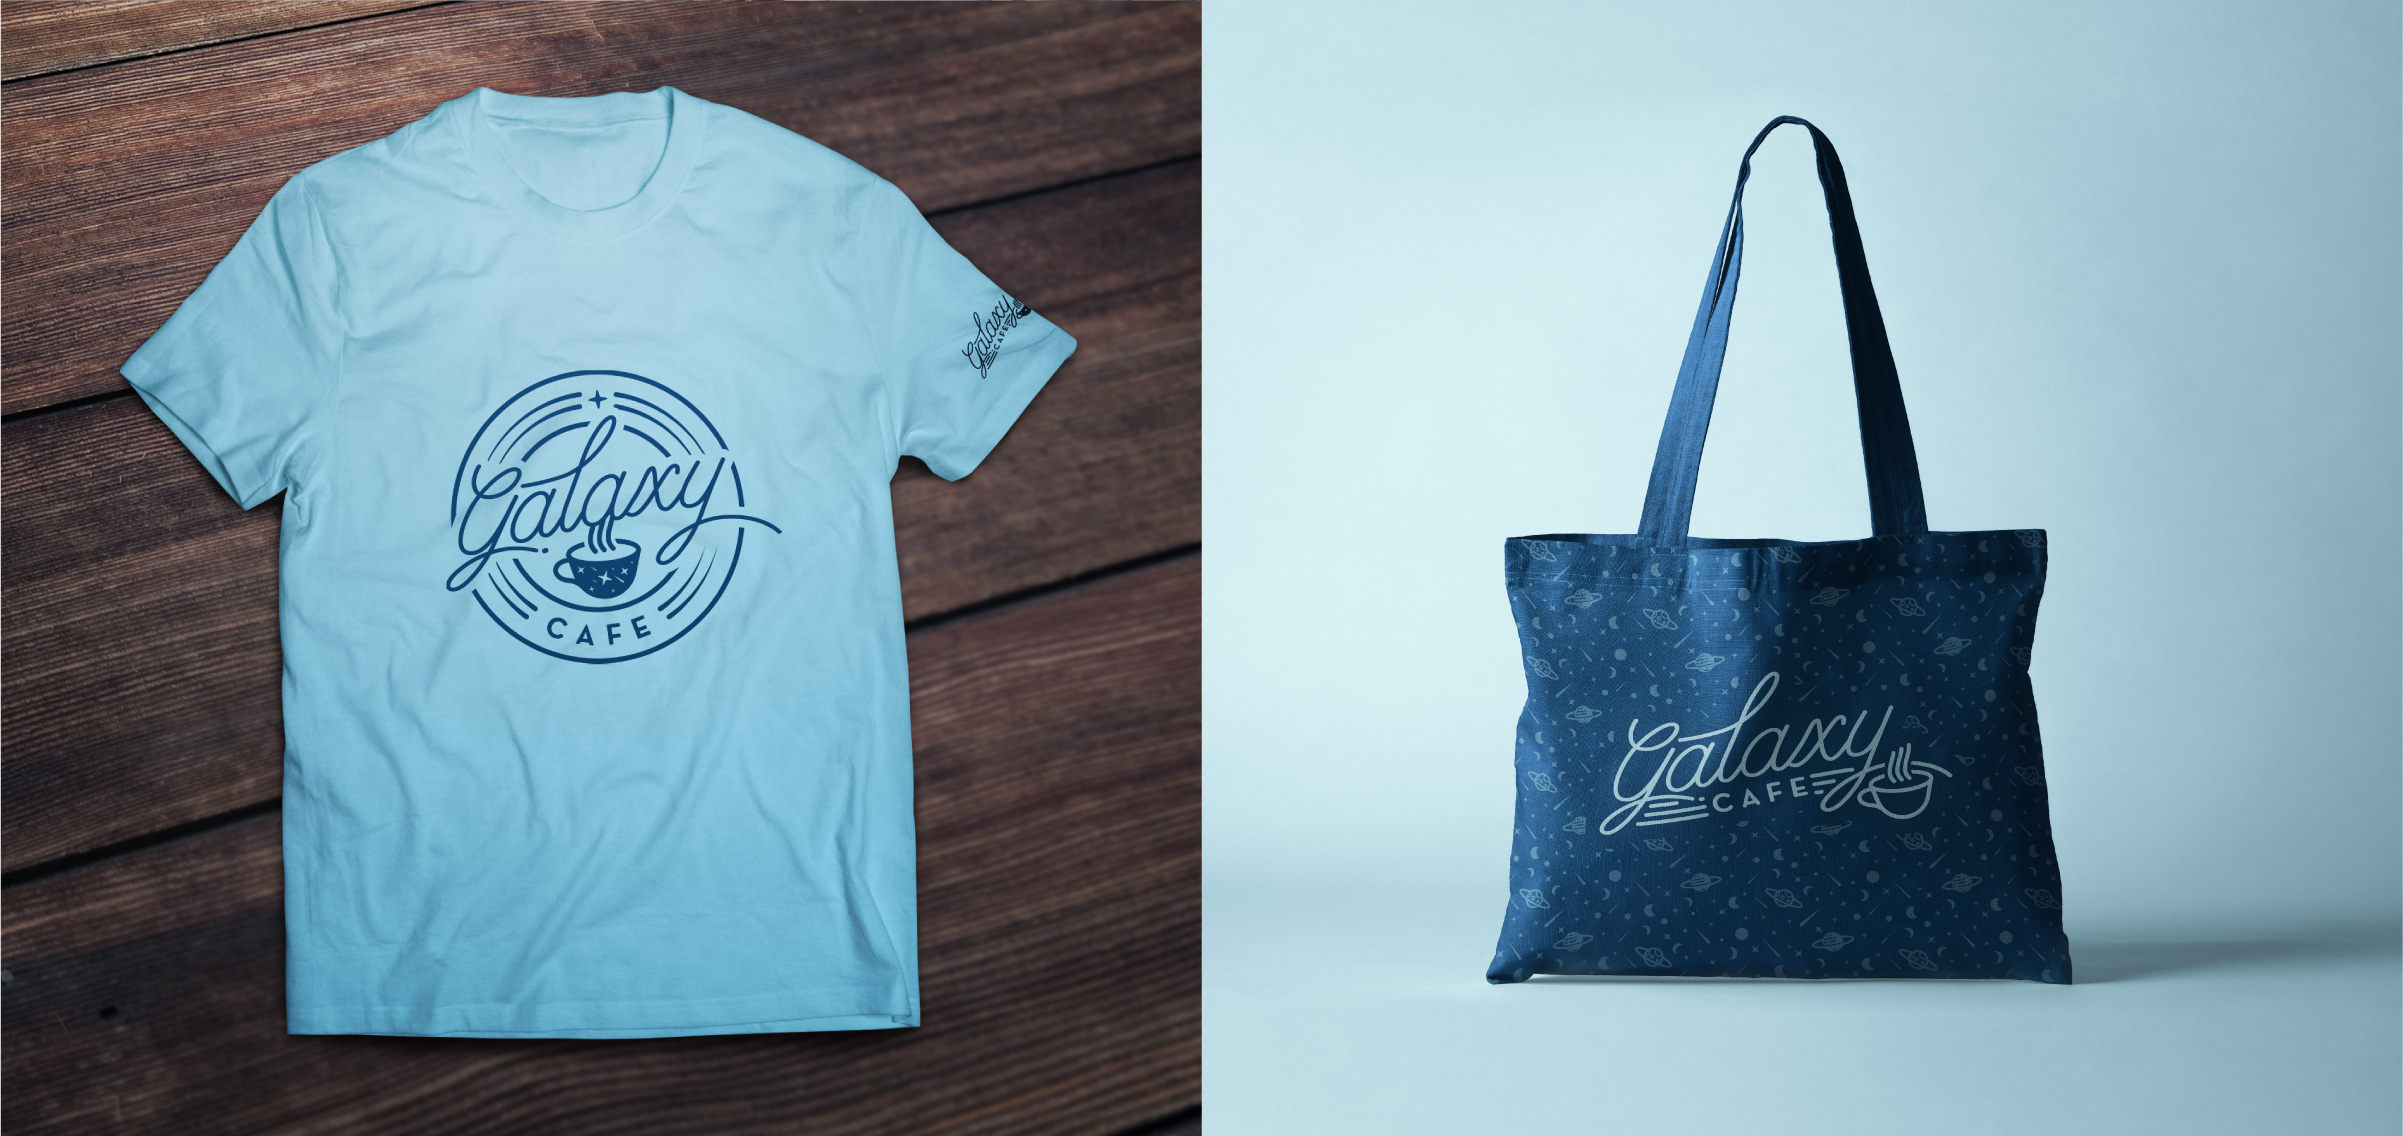 Galaxy Cafe Brand Identity Apparell Mockup with Tshirt and Hat